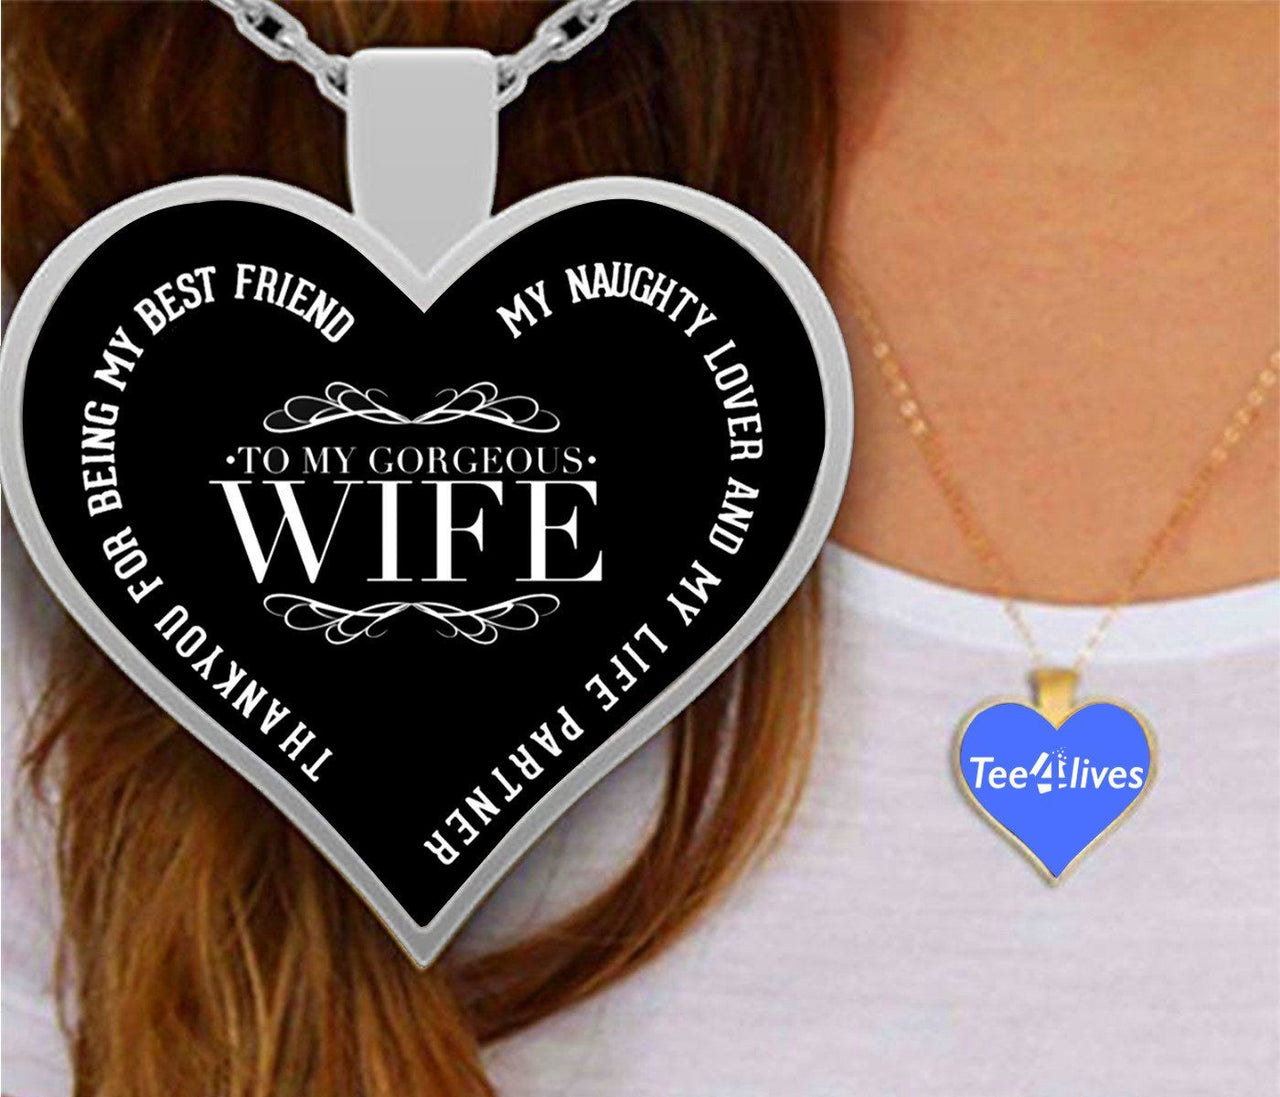 To My Gorgeous Wife Heart Necklace - Necklaces for Women 3